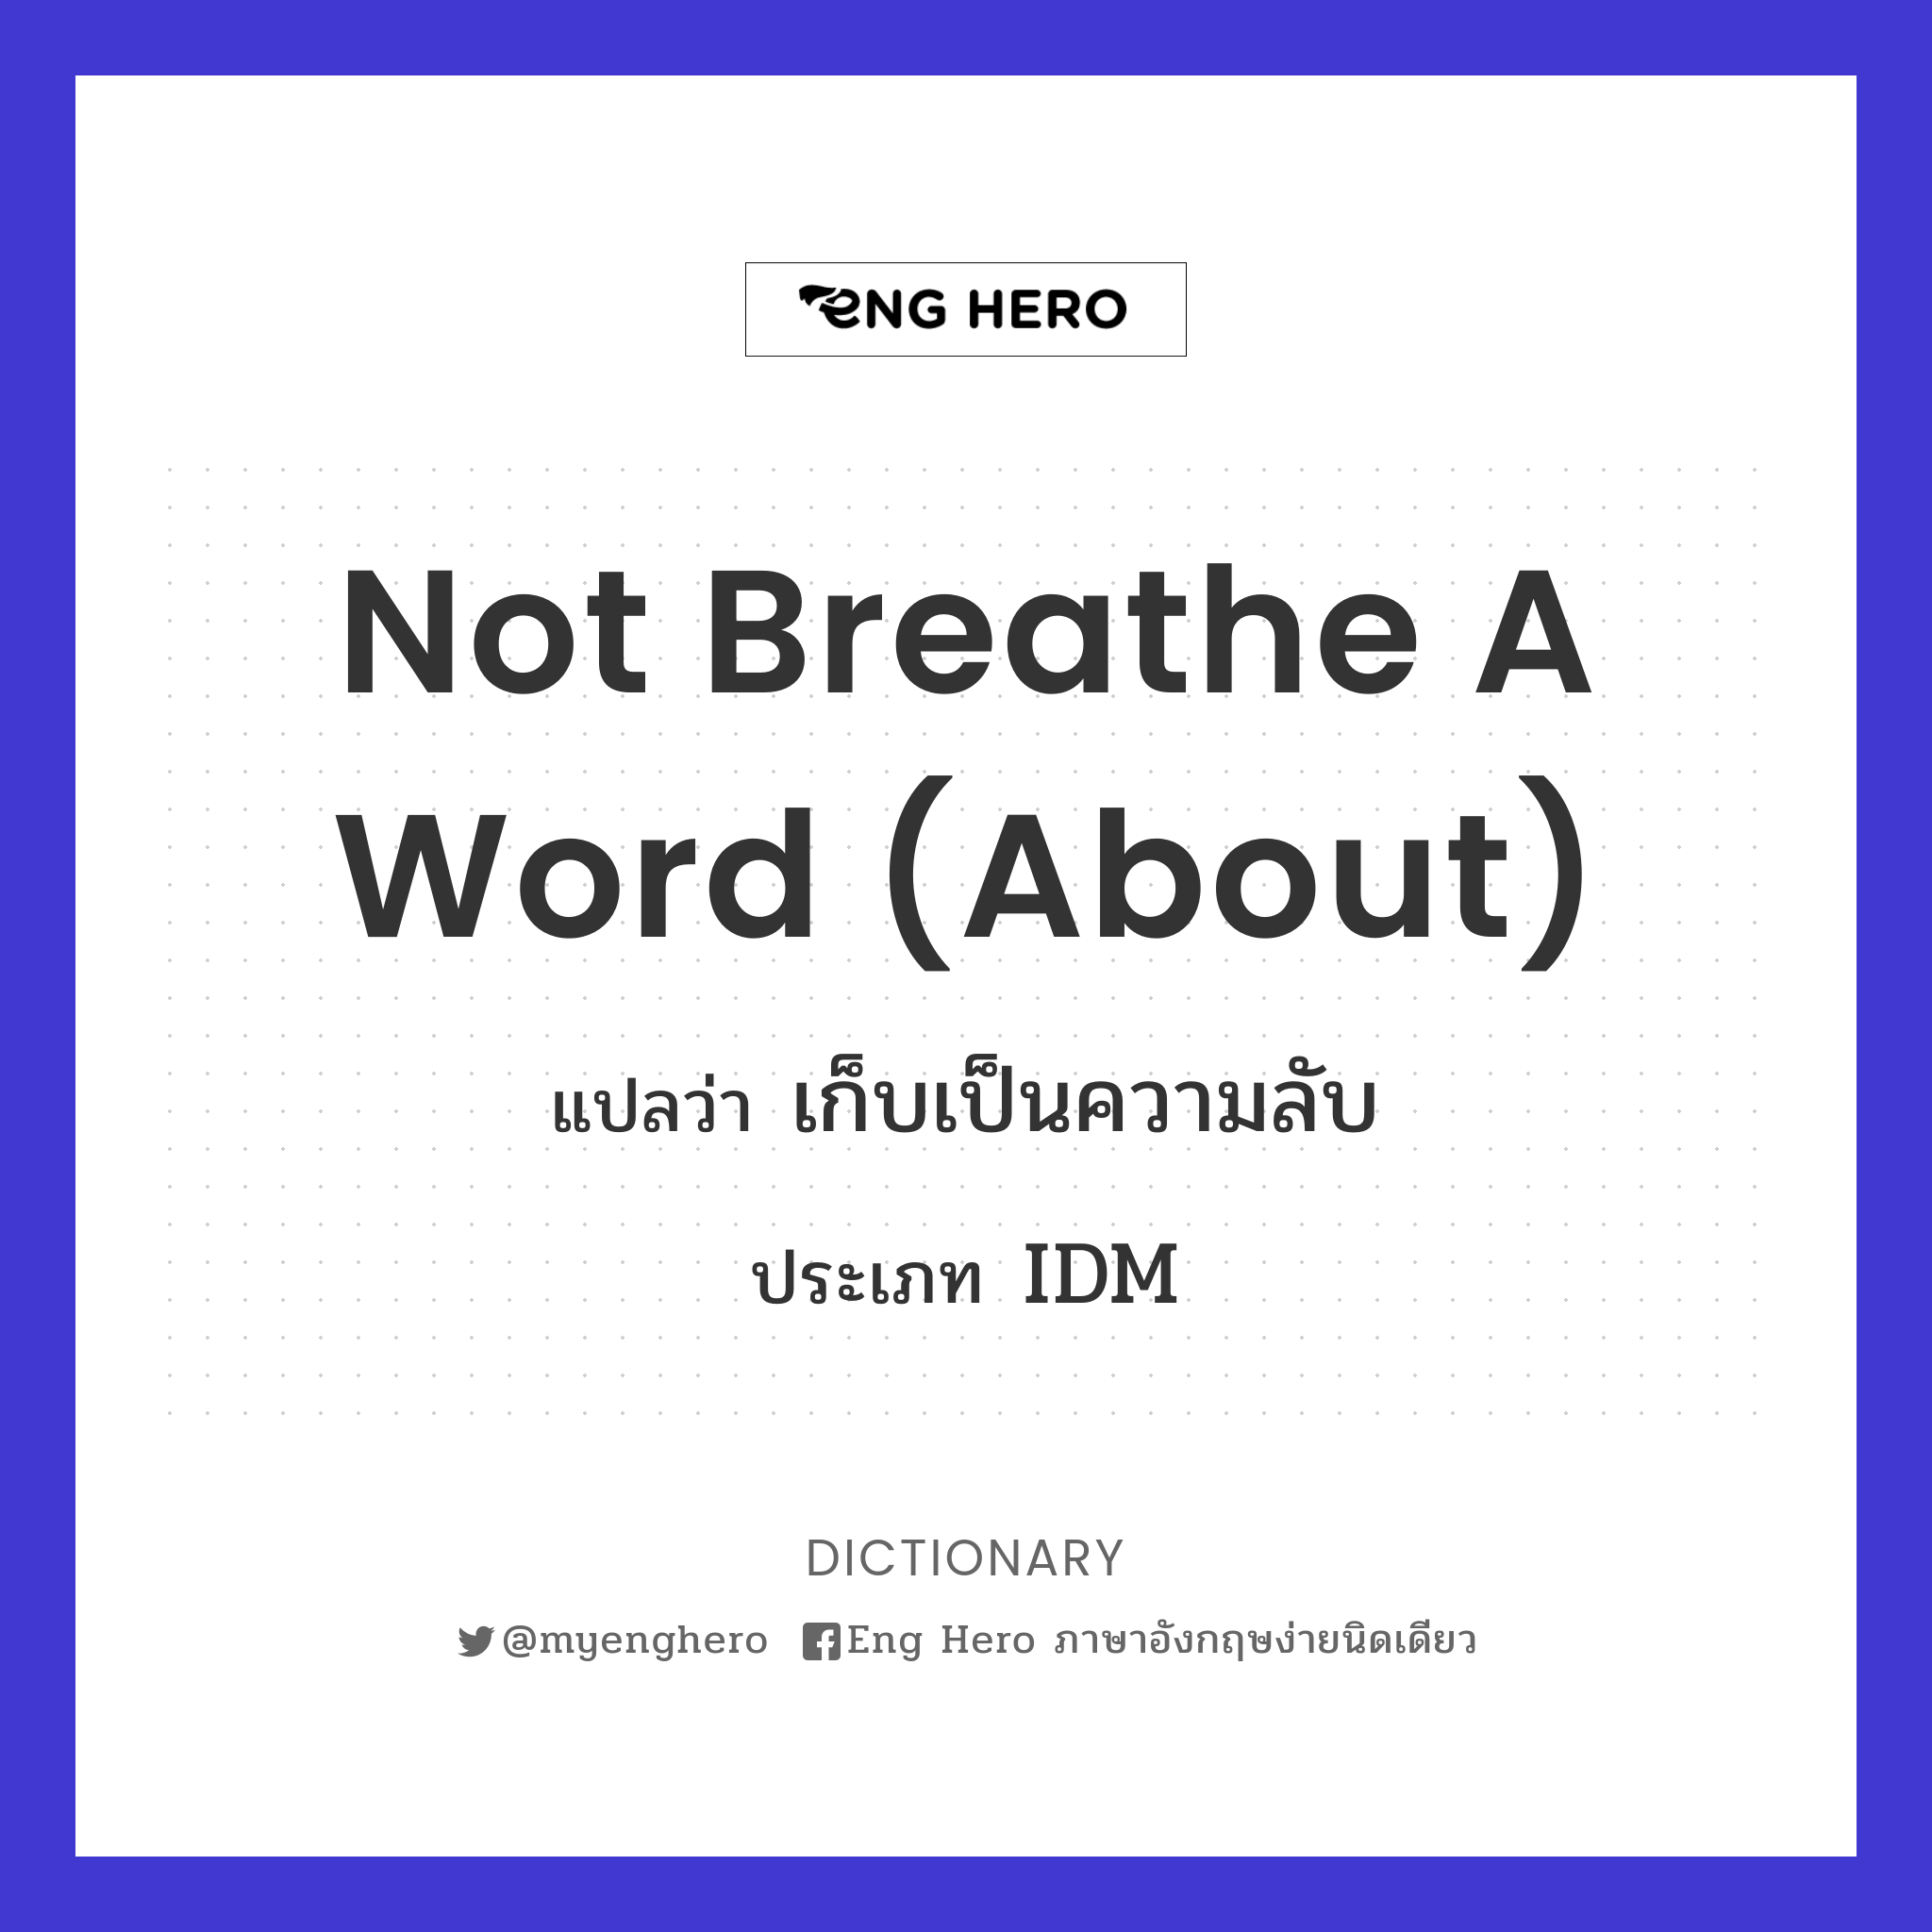 not breathe a word (about)